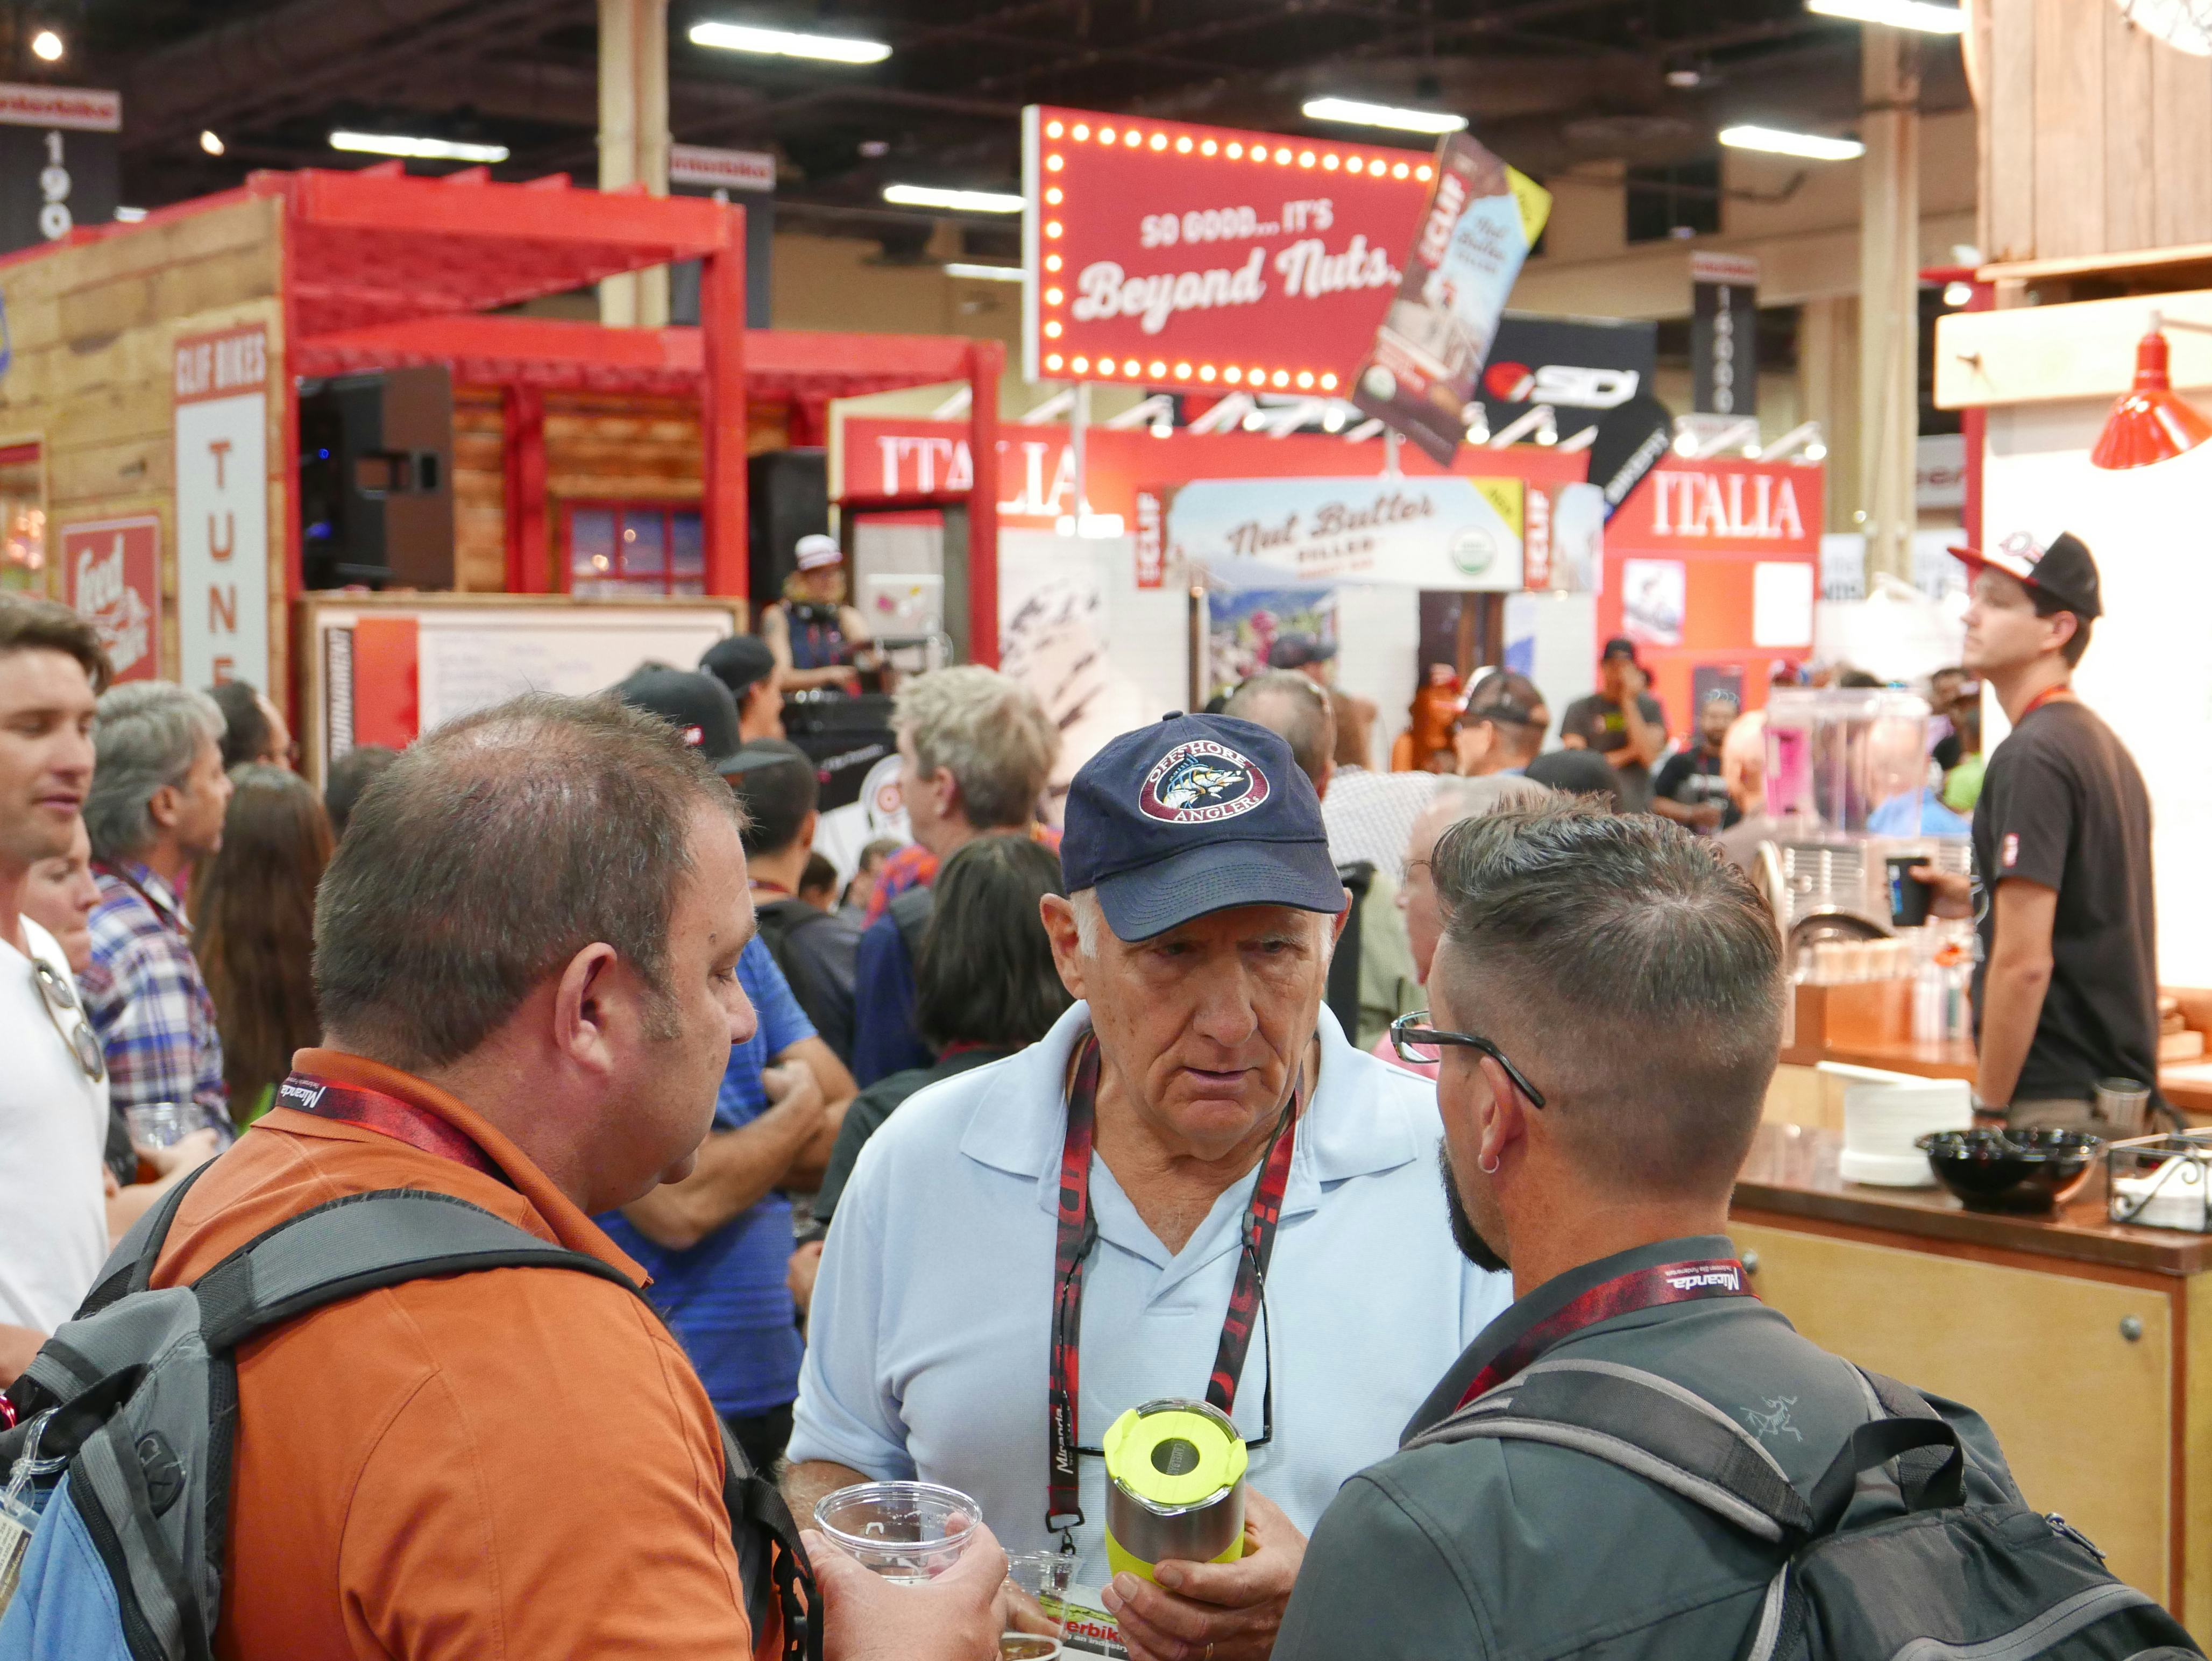 Interbike 2016 visitor numbers dropped by 10 to 12 percent; floor space was down 8 percent compared to last year. – Photo Jo Beckendorff